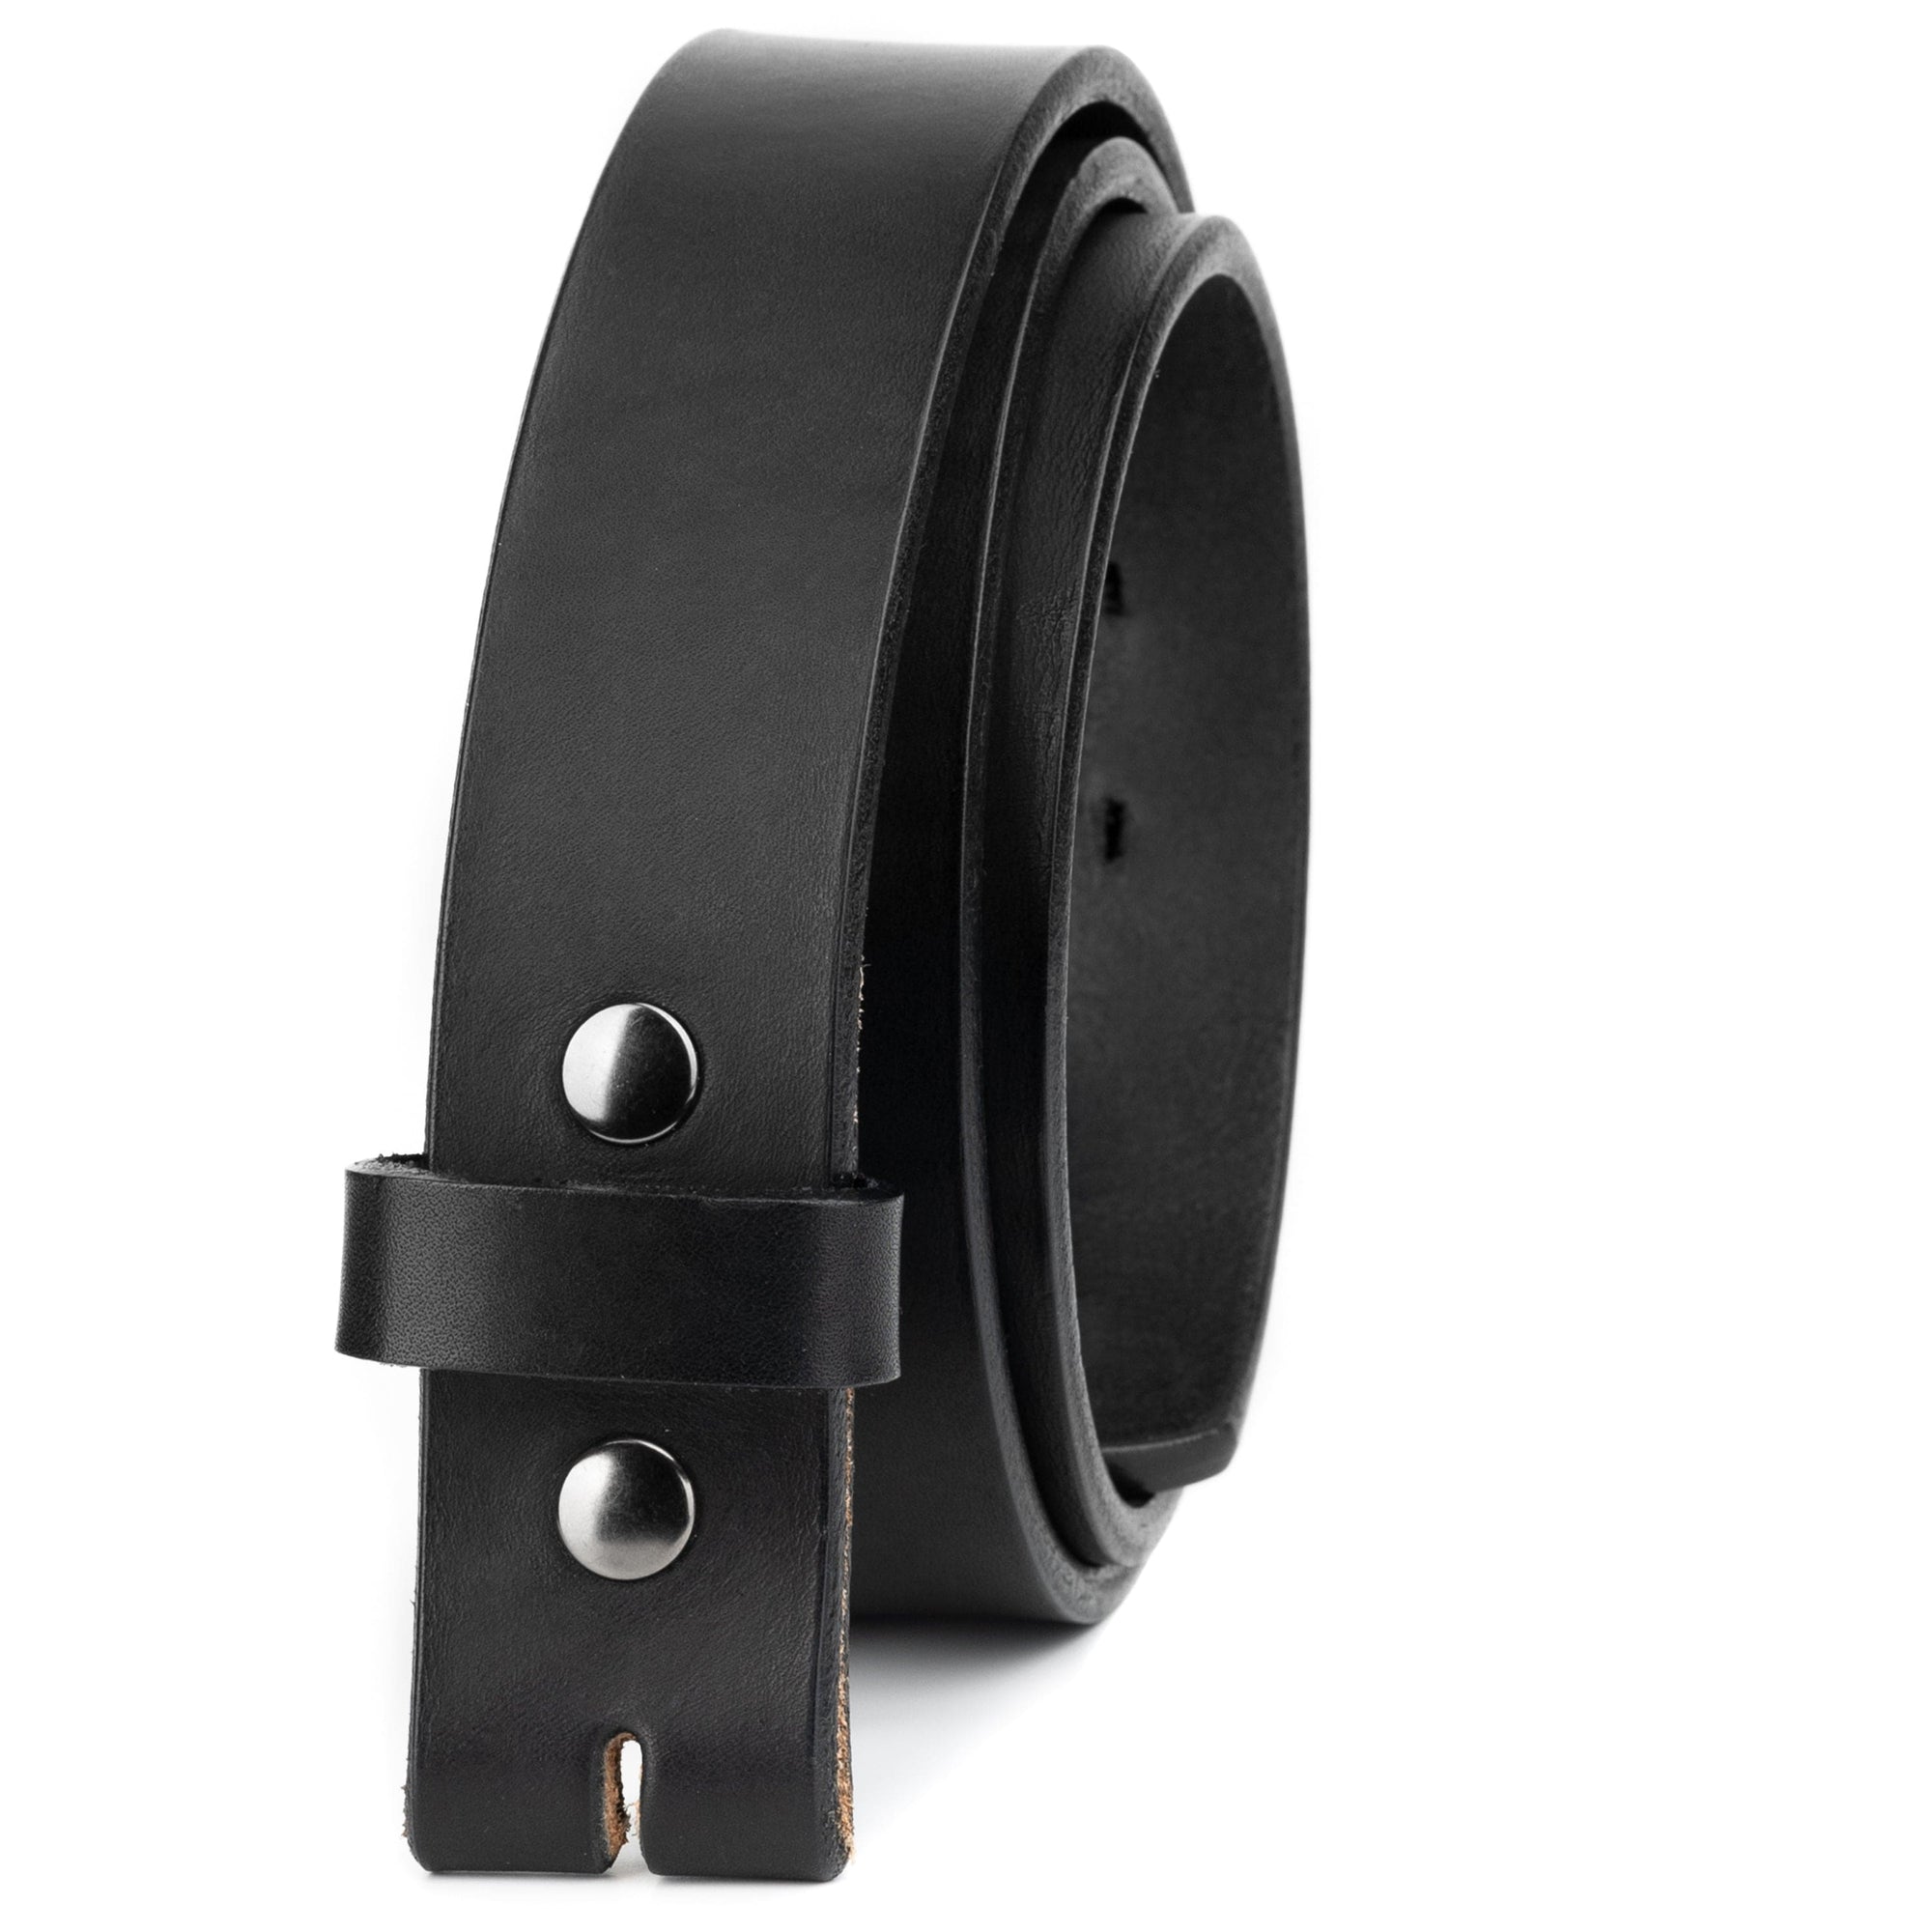 Western Leather Belt Without Buckle for Men 1.5 Wide with Snaps